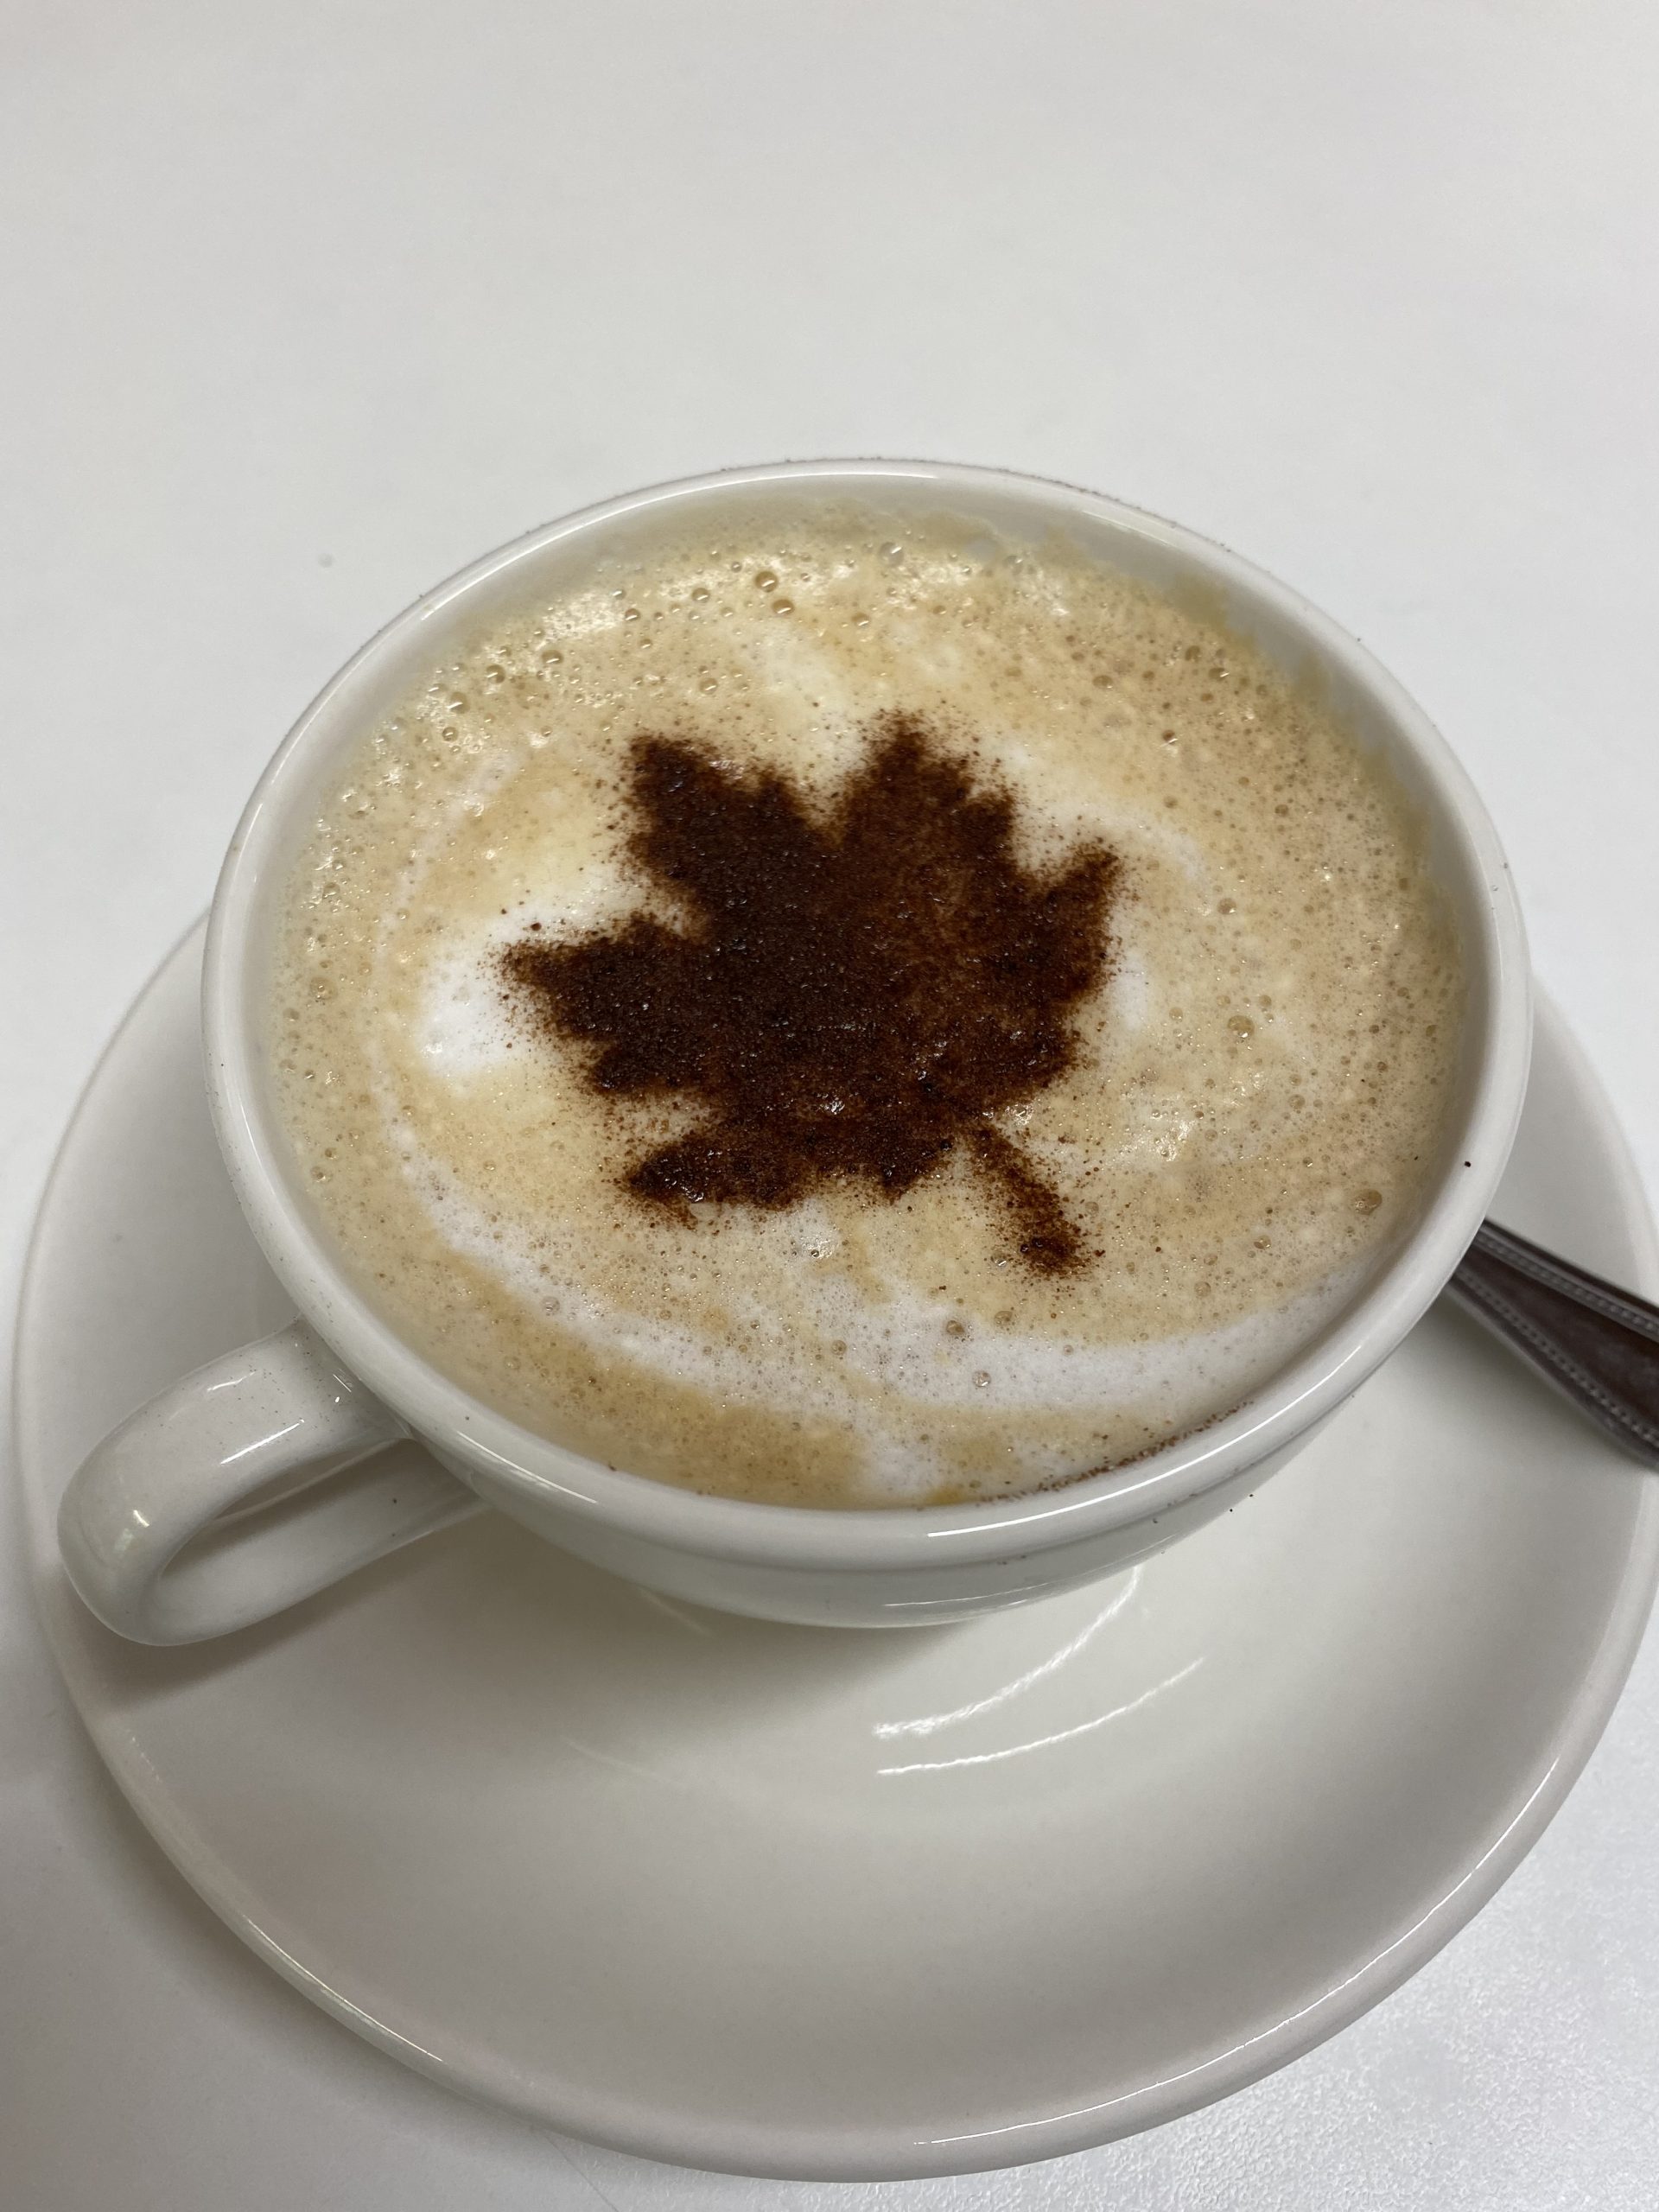 A cappuccino with an autumnal oak leaf made from chocolate powder